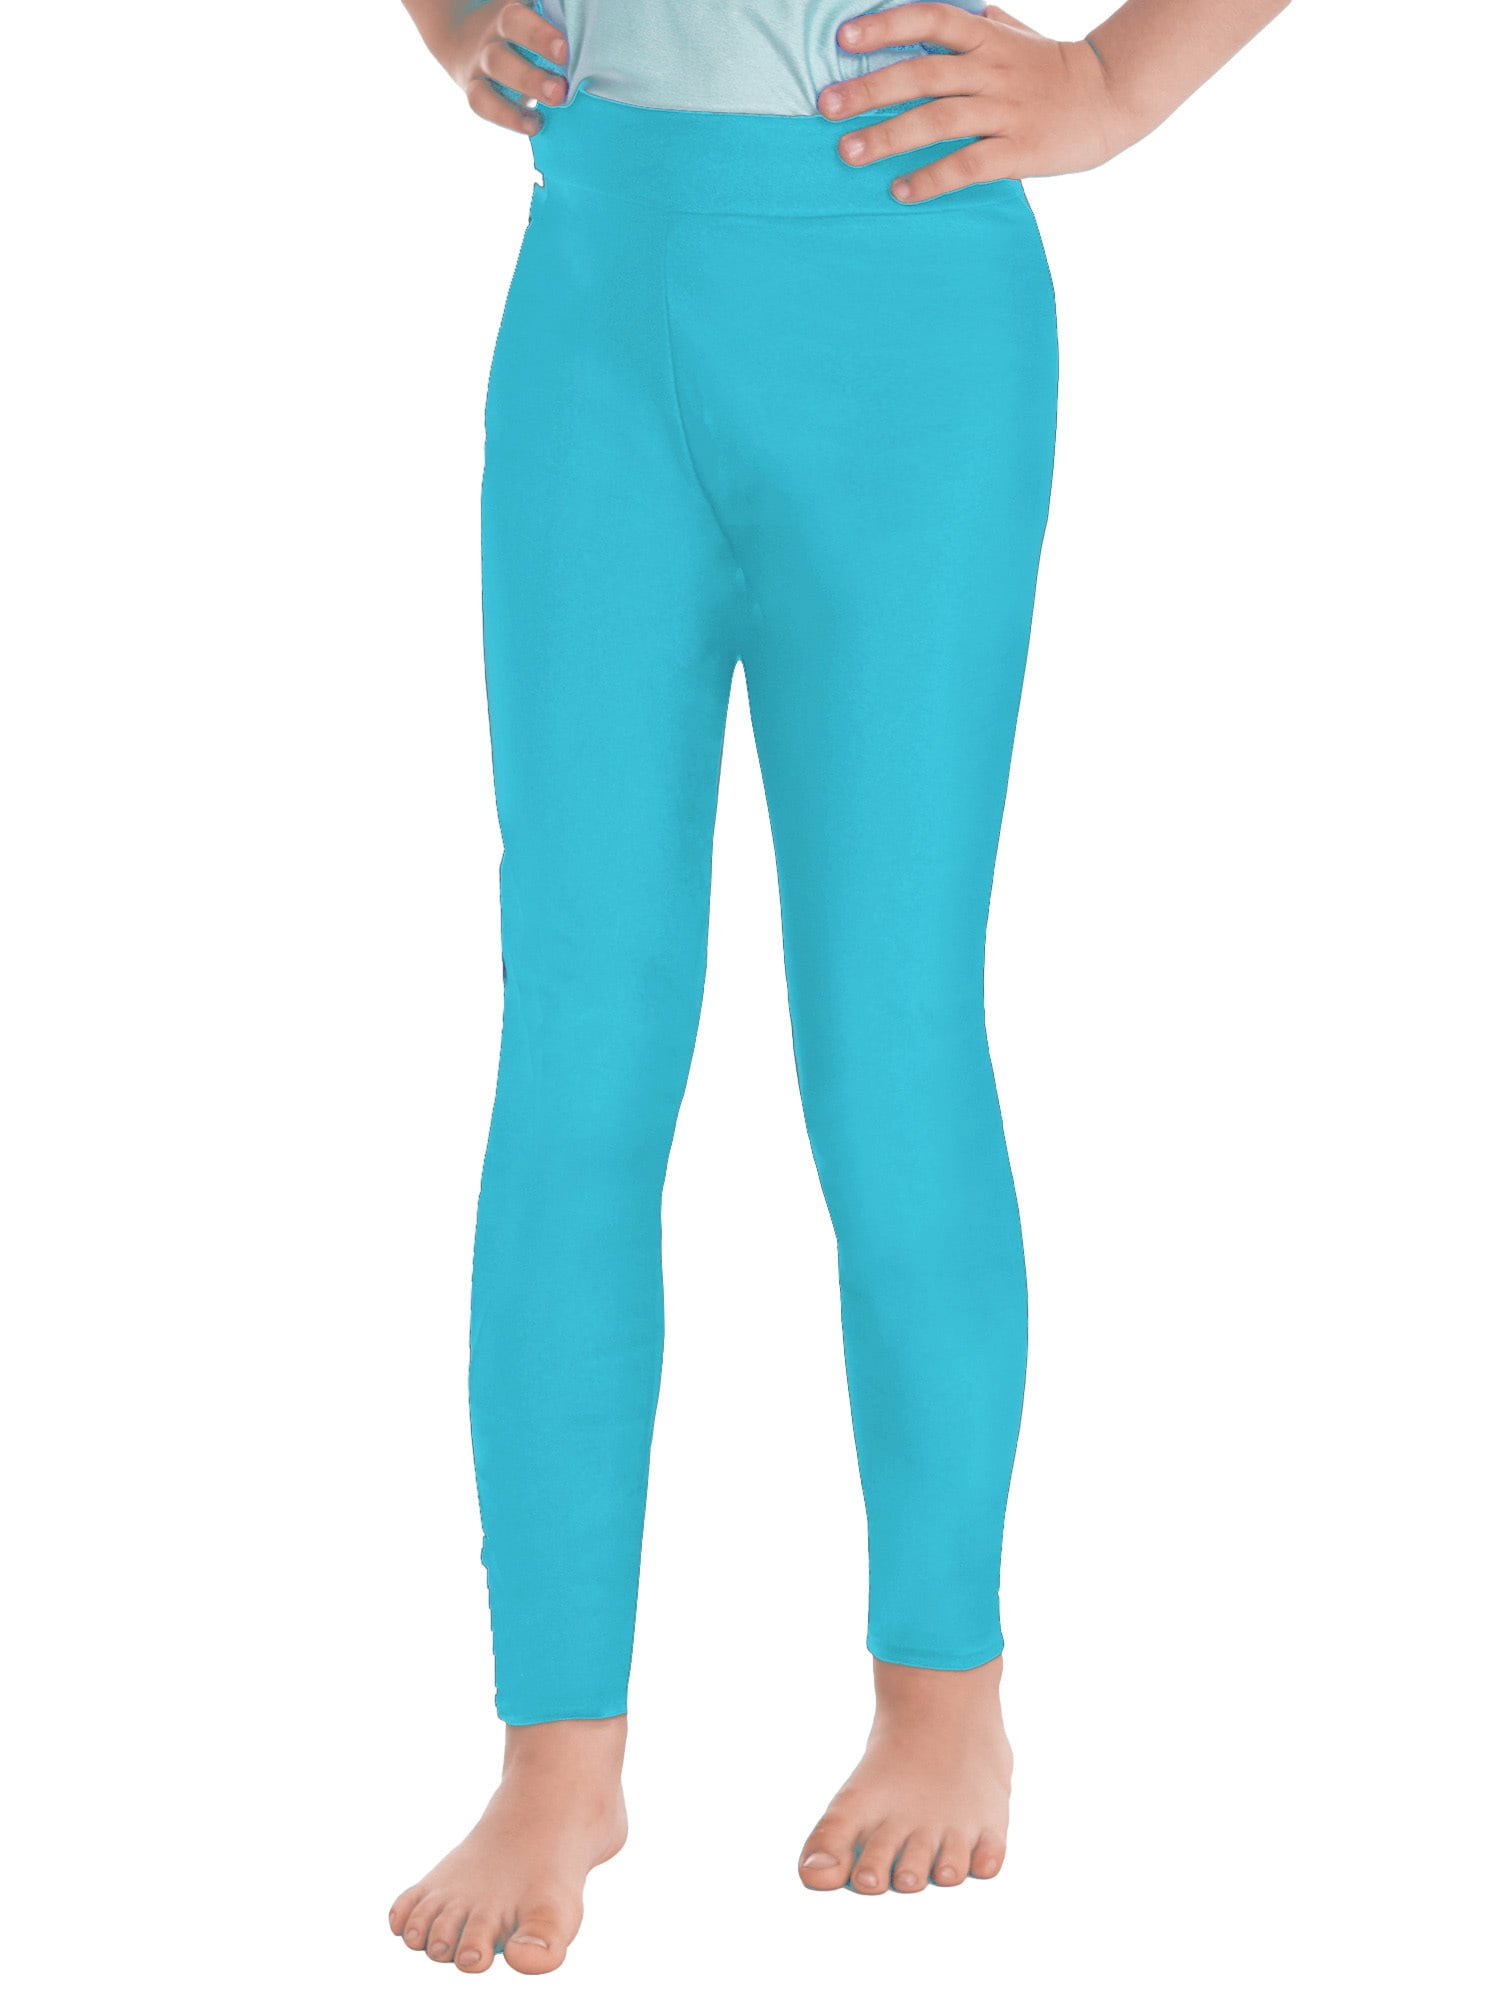 DPOIS Girls' Compression Pants Yoga Tights Athletic Sports